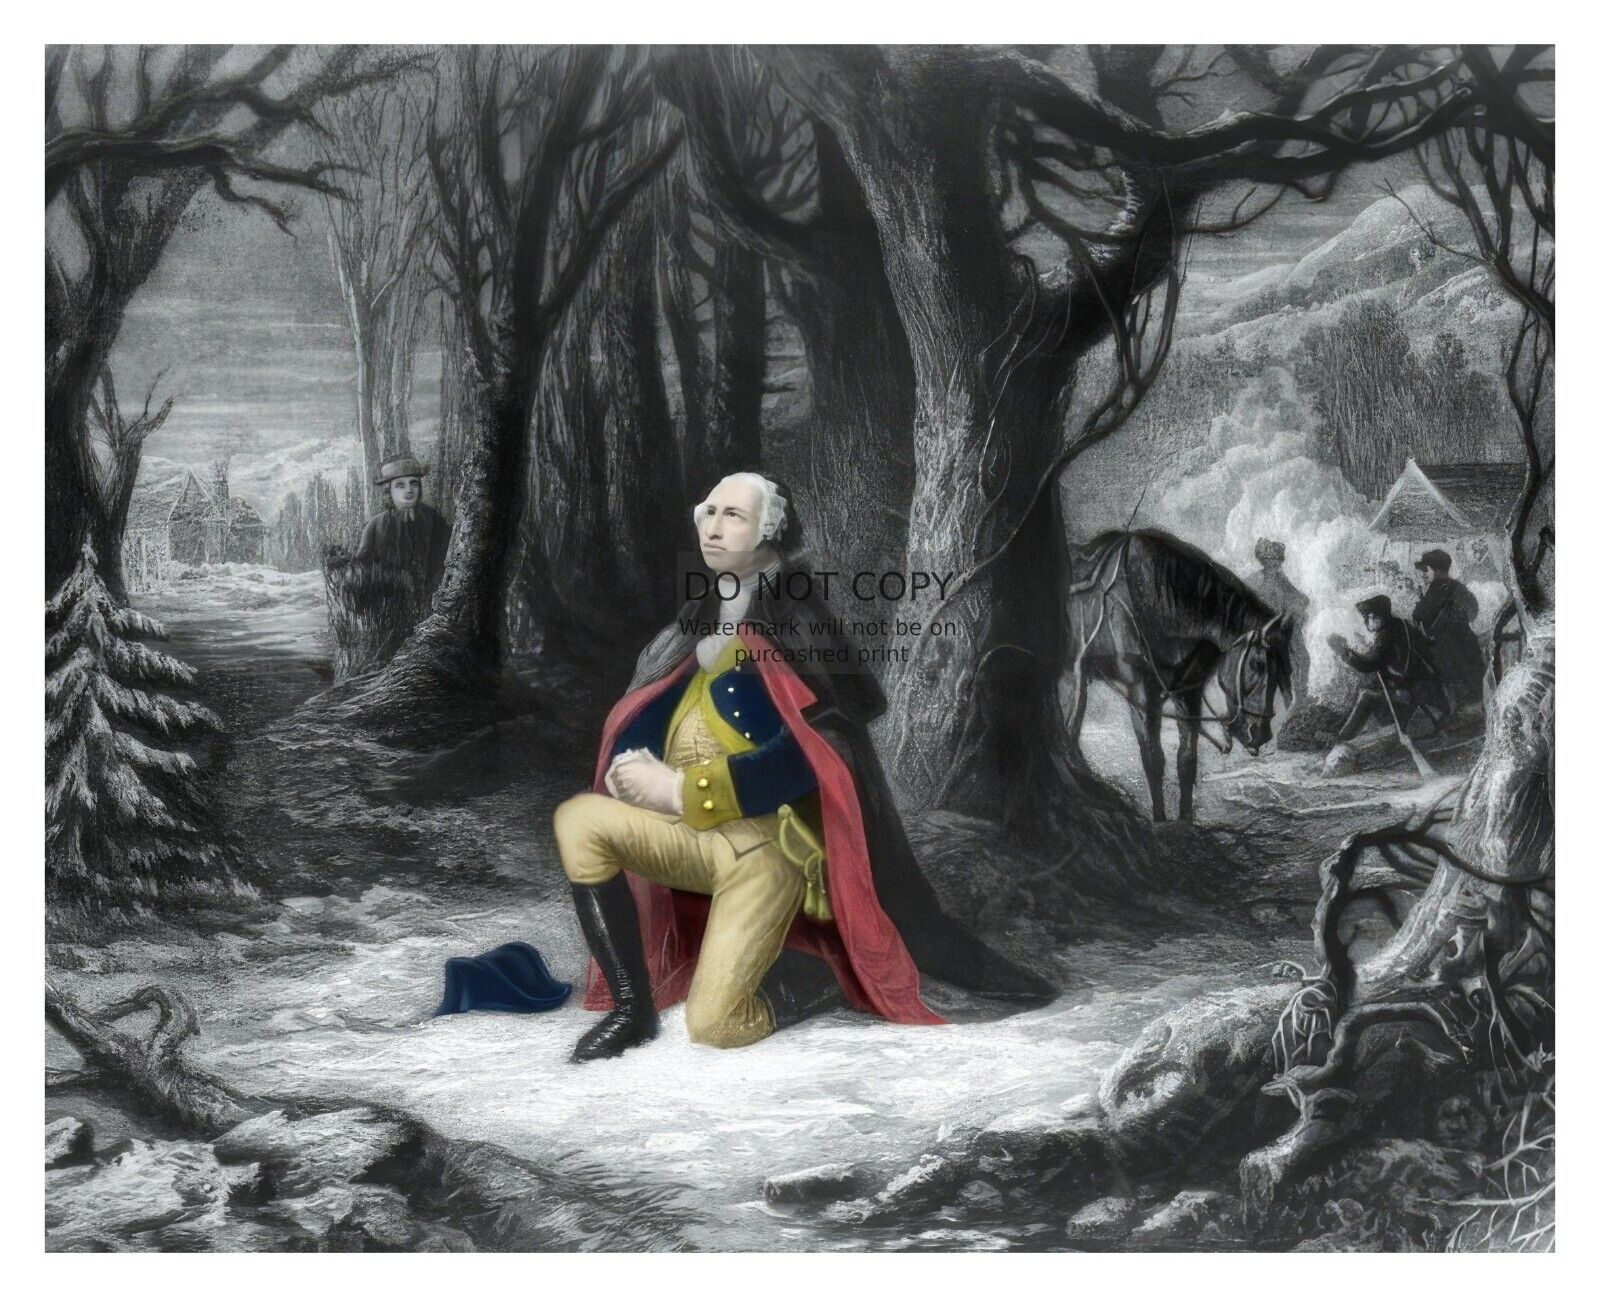 PRESIDENT GEORGE WASHINGTON IN PRAYER AT VALLEY FORGE 1777 8X10 PHOTO